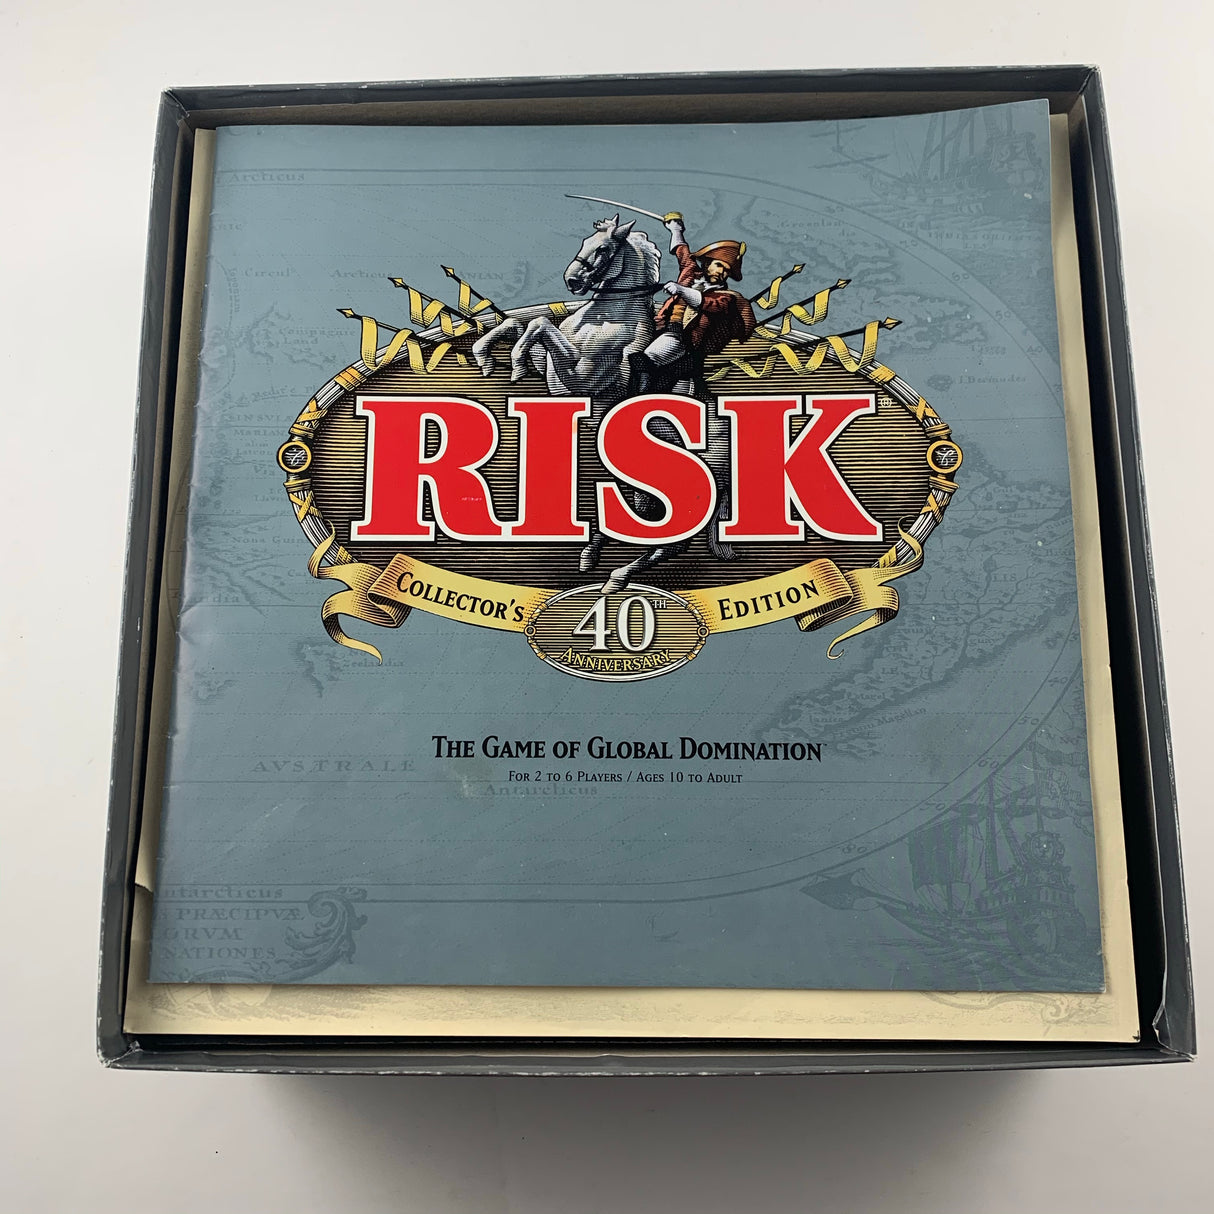 Risk 40th Anniversary Edition (1999) - Parker Brothers